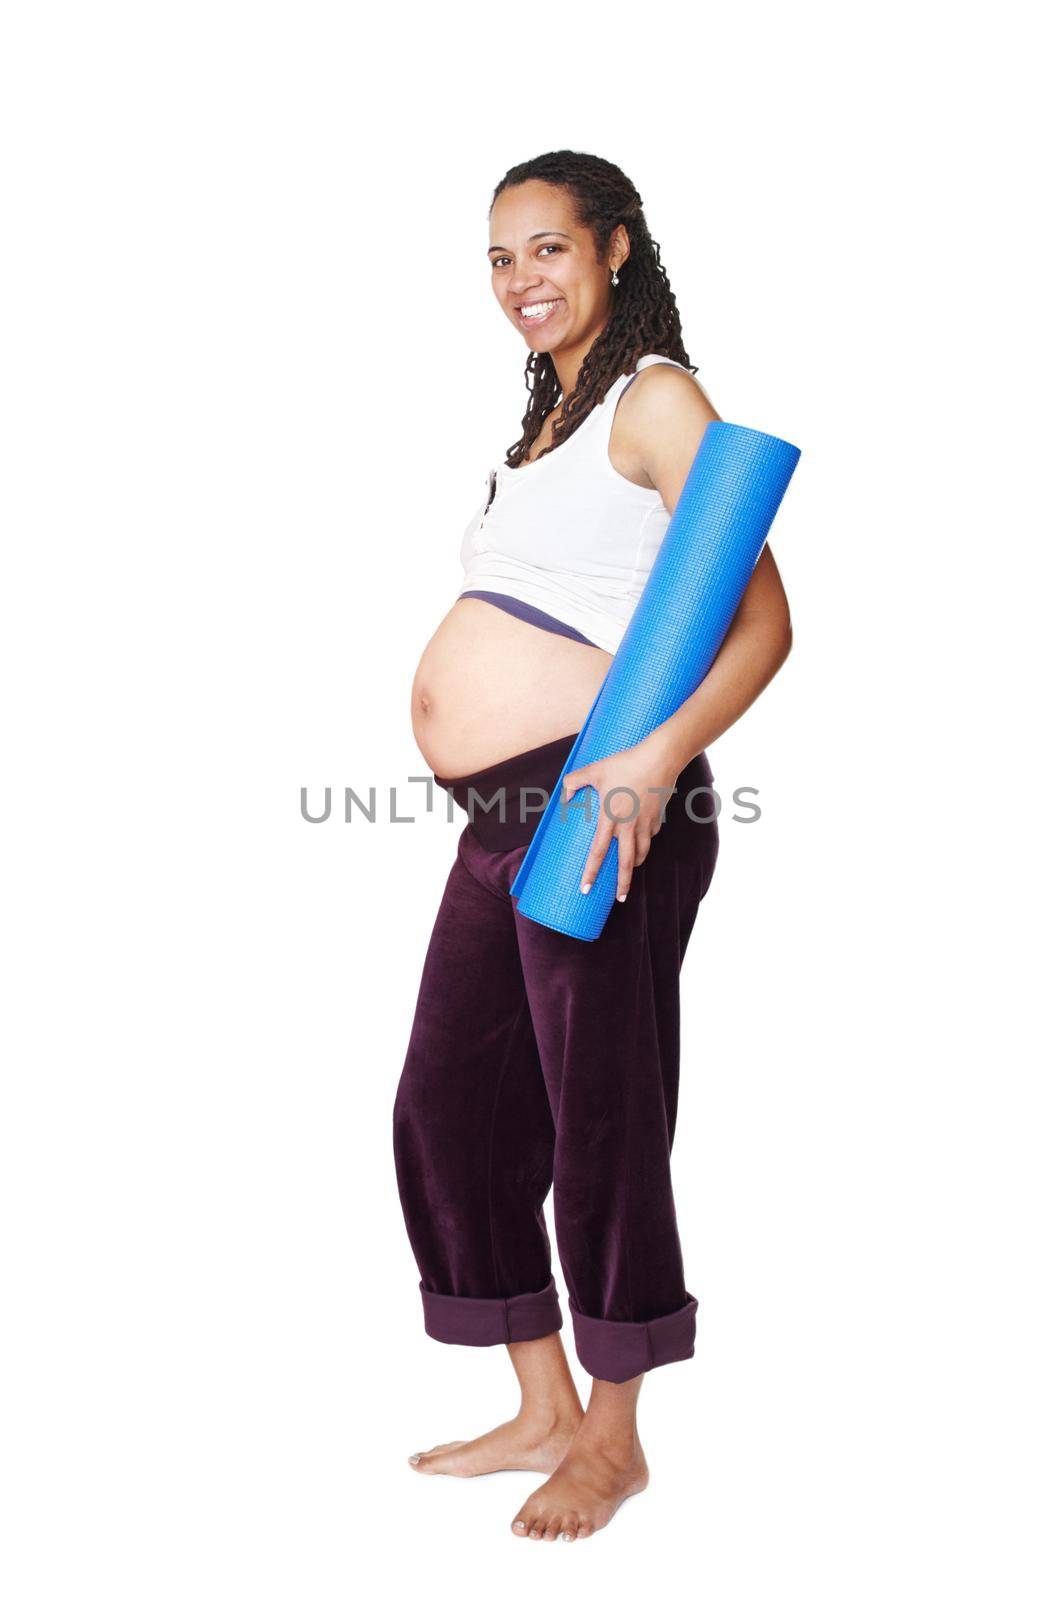 Pregnant, happy and yoga woman in portrait shows pregnancy, healthcare and wellness for her baby. Pilates, fitness and spiritual mother to be with a smile, mat and big stomach in studio for exercise by YuriArcurs